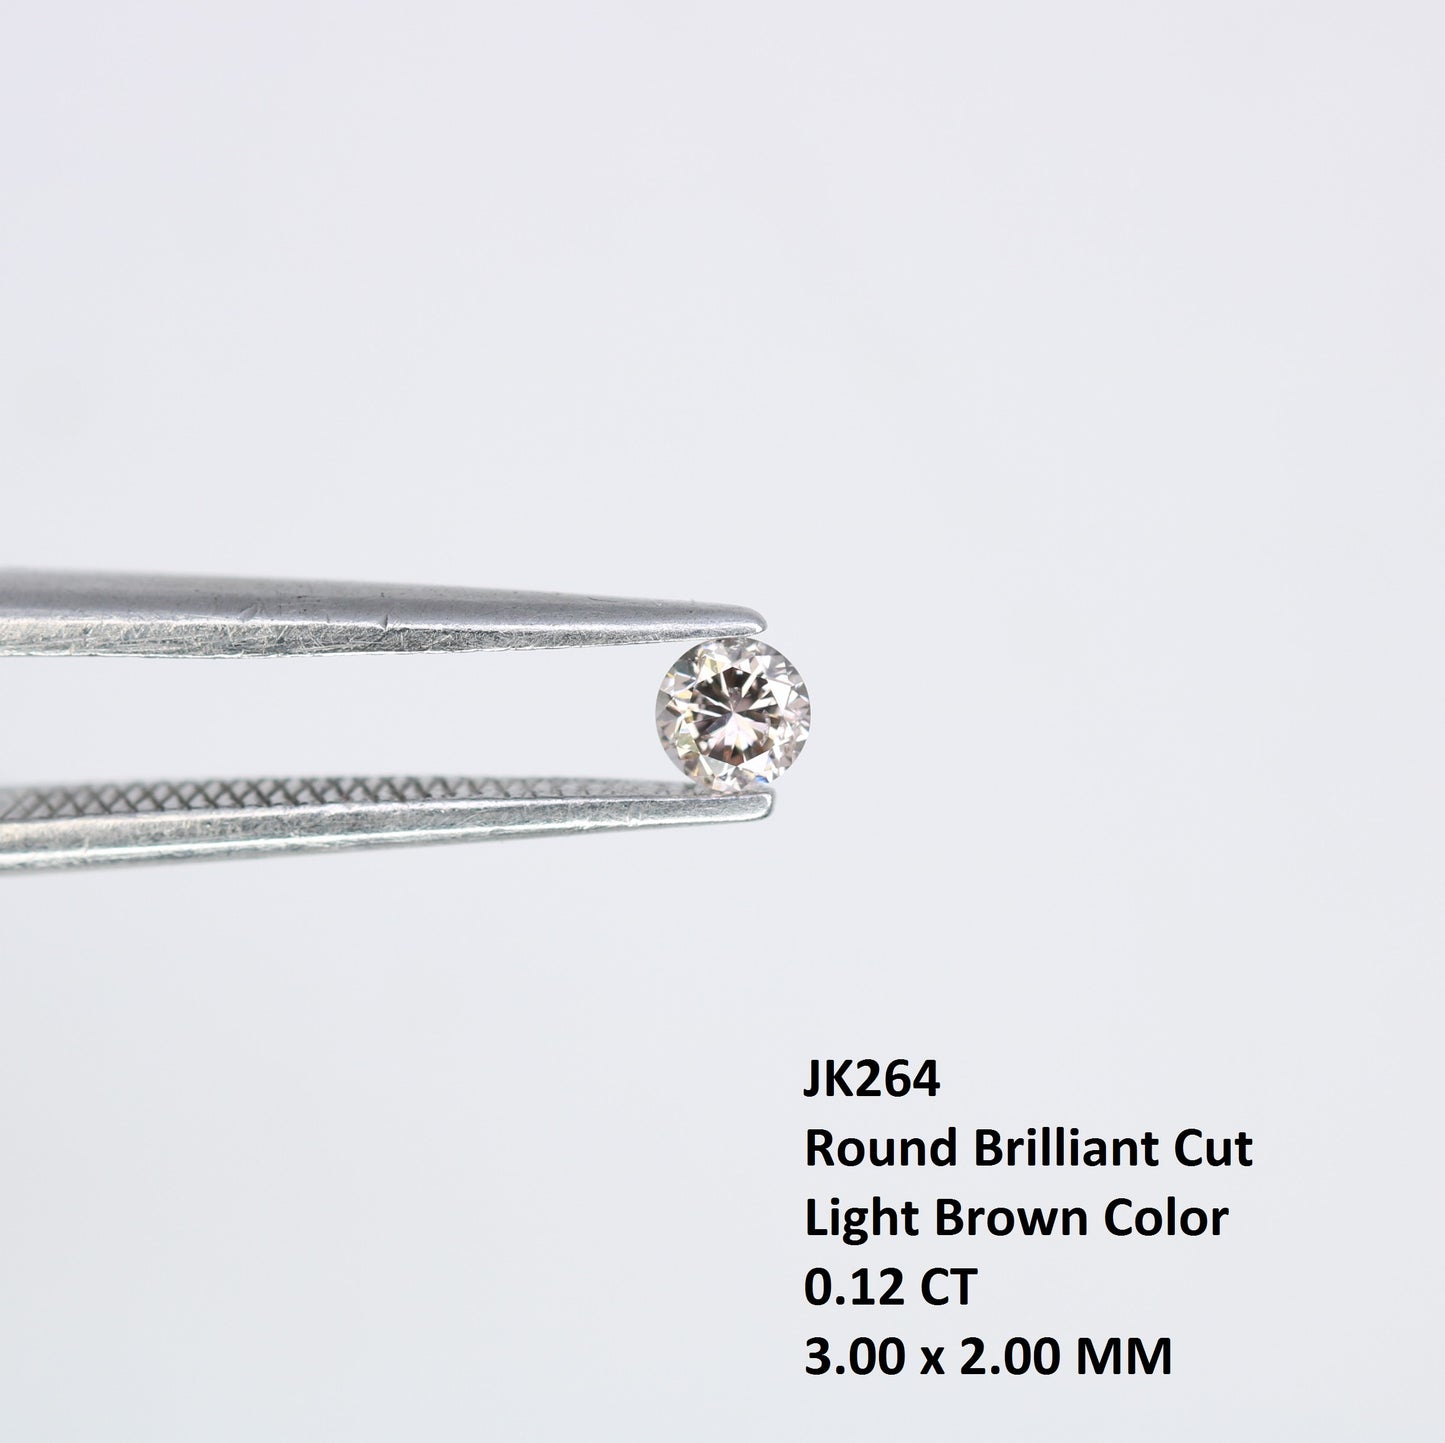 0.12 CT Round Brilliant Cut 3.00 x 2.00 MM Light Brown Diamond For Engagement Ring